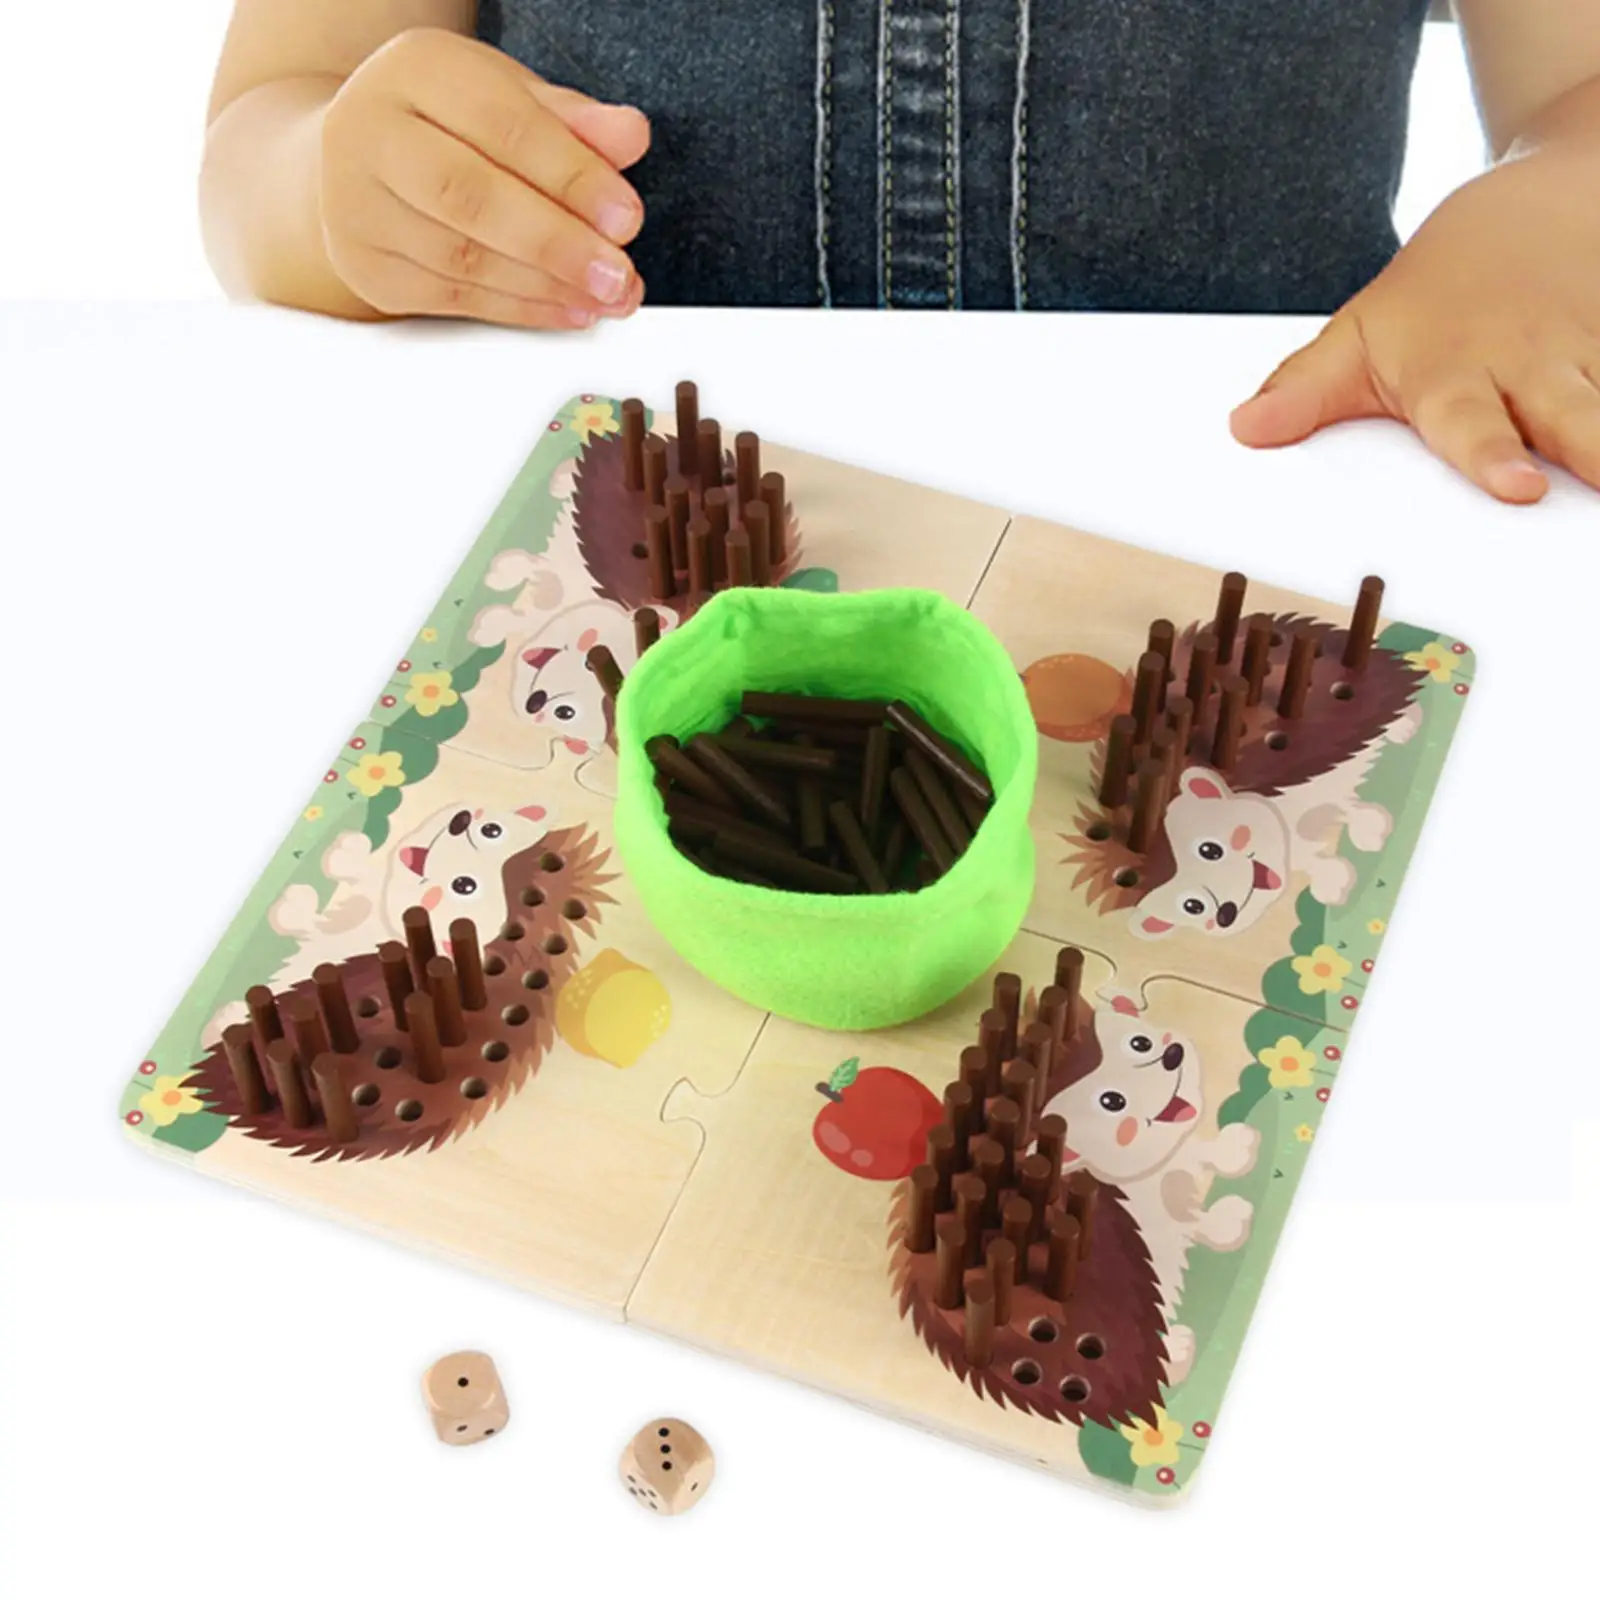 Hedgehog Game Colour Recognition Toy Counting Matching Game for Creative Sorting